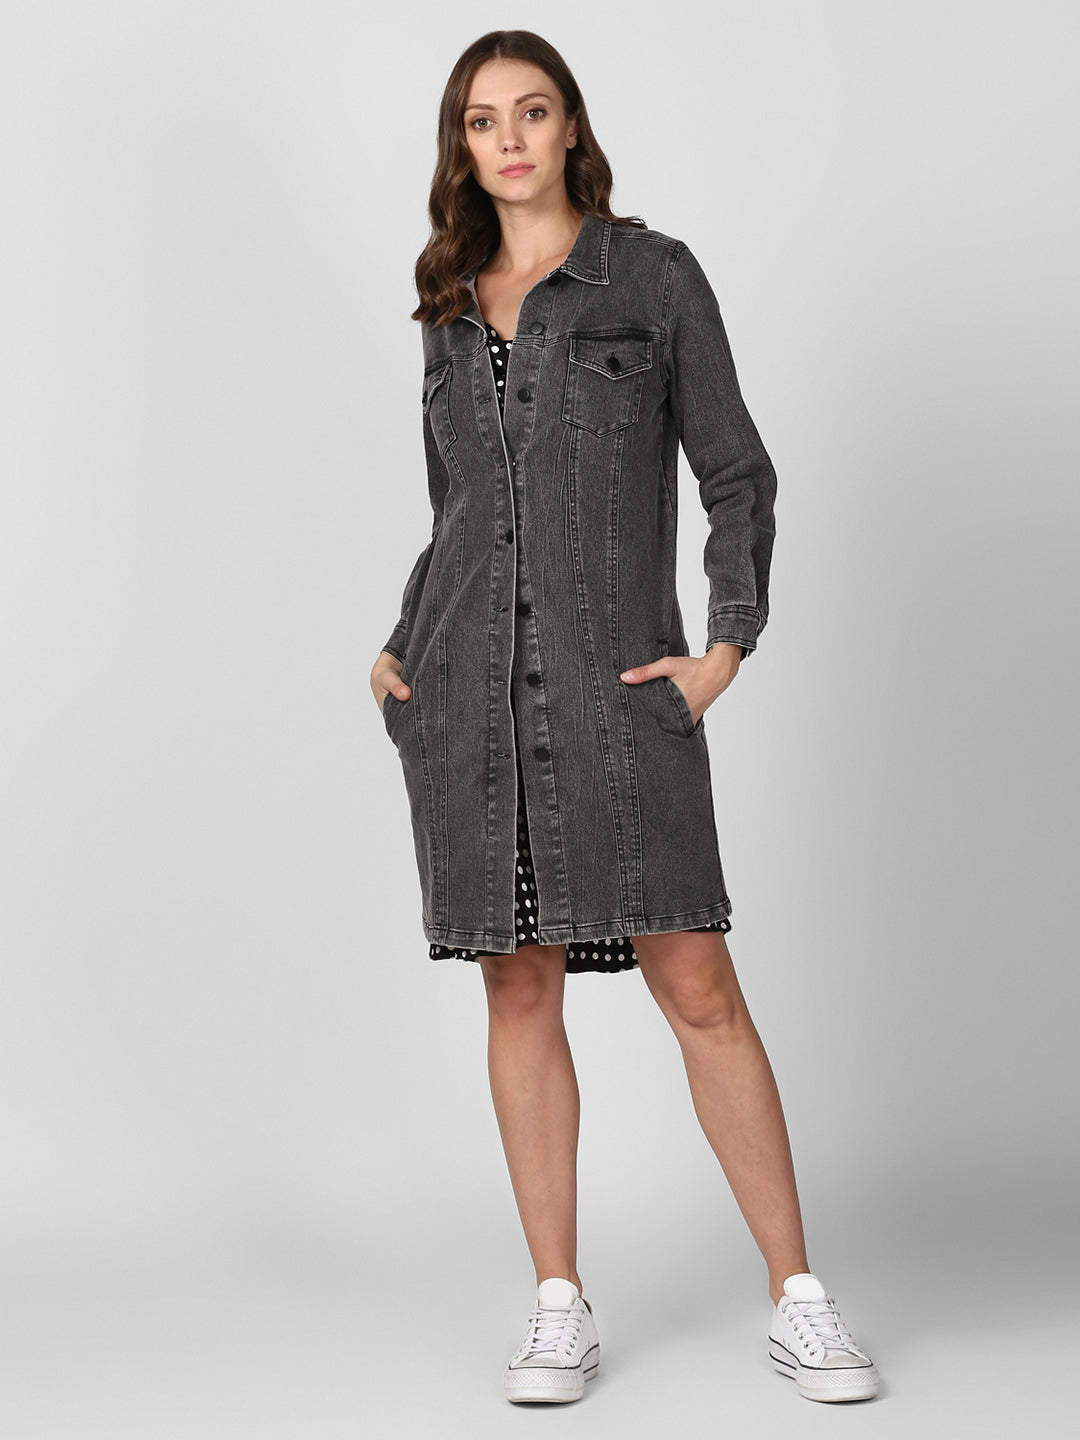 Women's Grey Long Overcoat Style Denim Jacket with Washed effect